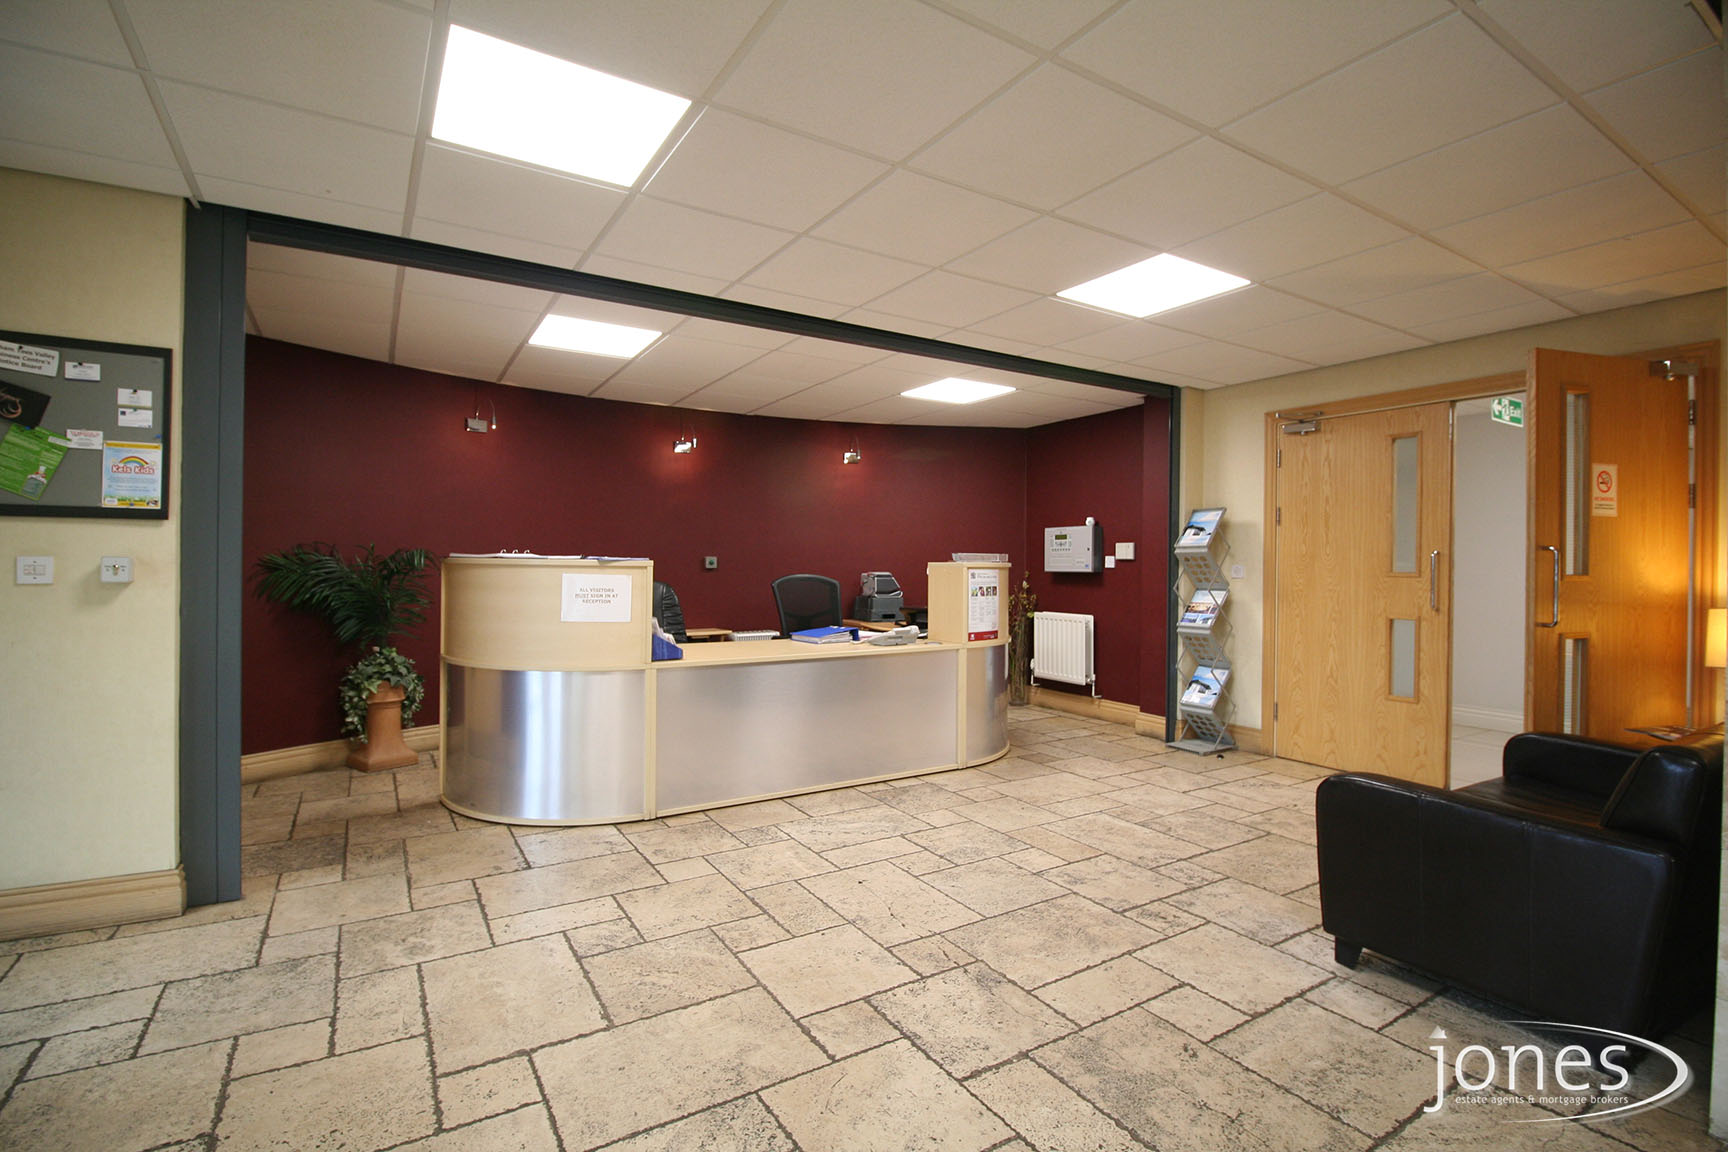 Home for Sale Let - Photo 02 Durham Tees Valley Business Centre, Orde Wingate Way,Stockton on Tees, TS19